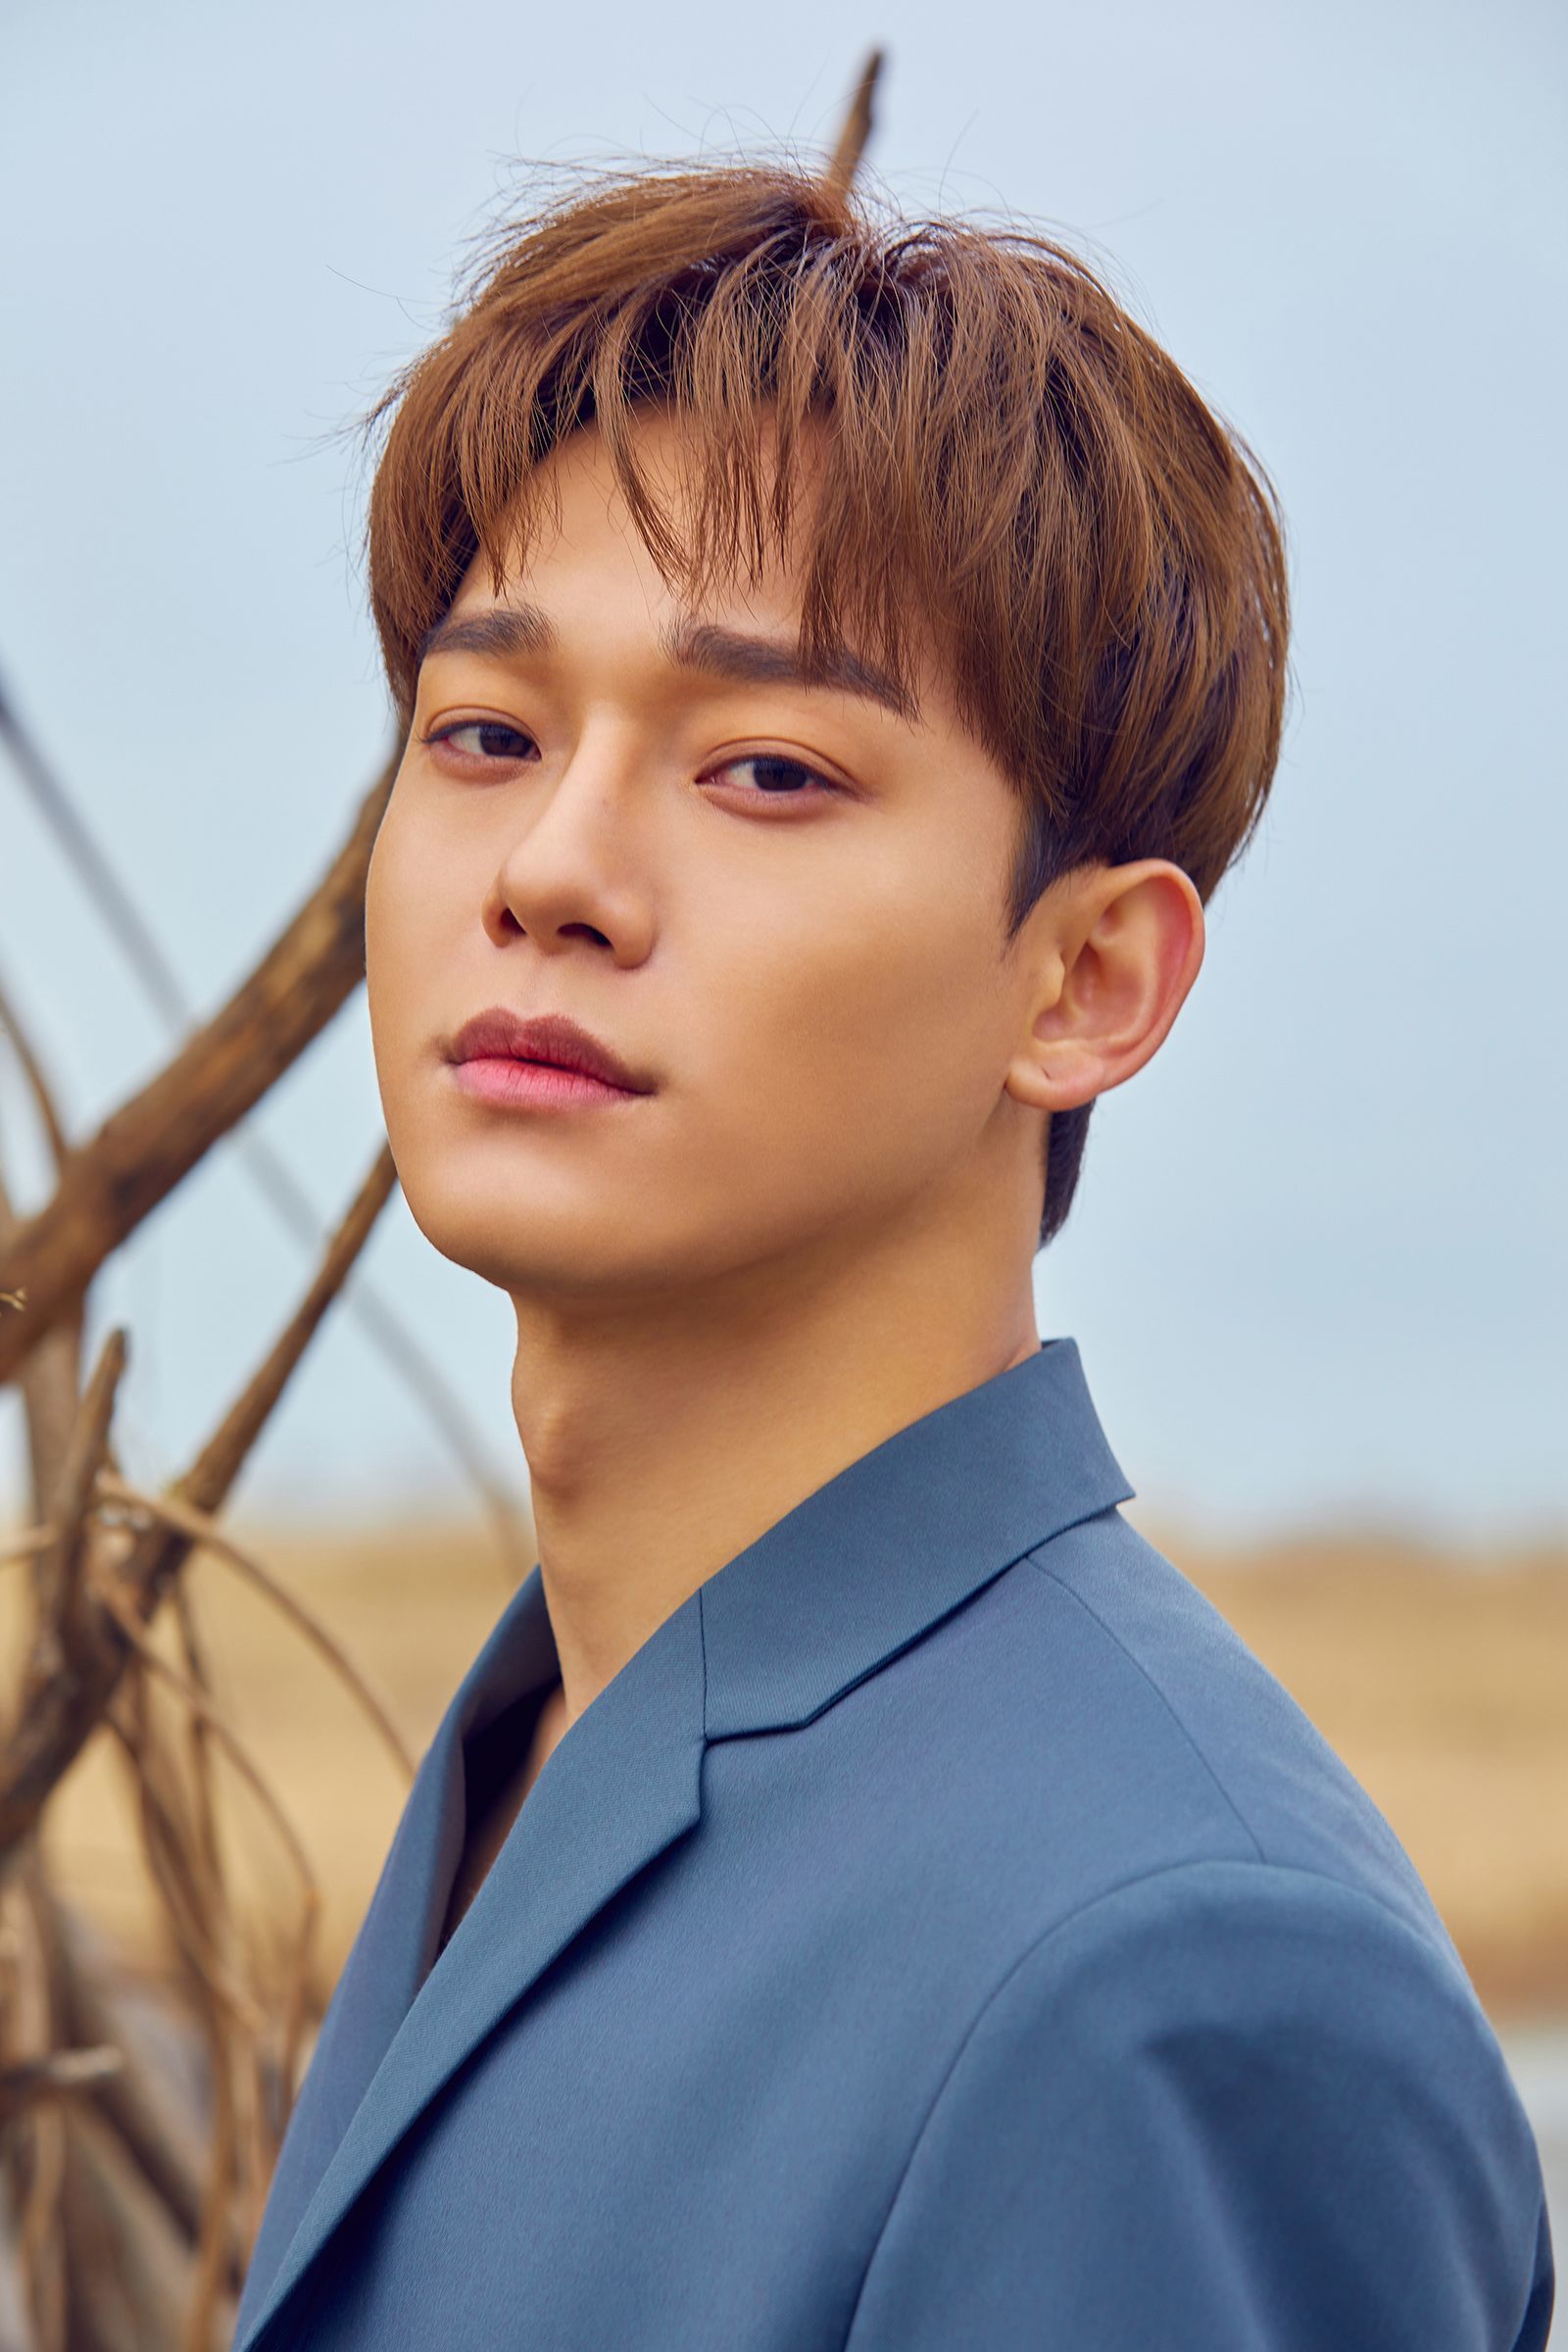 Fans have completely turned to the news of the group EXO Chen, which was announced in three months after the announcement of marriage.Chen was a big girl, said SM Entertainment, a subsidiary company, on the 29th of last month. Chens wife had a daughter child birth at a maternity clinic in Cheongdam-dong, Gangnam-gu, Seoul.As a result, Chen was the first member to win the title of Dad after the title of Many people celebrated the news, but the fans were different. Chens EXO Exiting was more strongly demanded.Chens earlier denial of reports that the bride-to-be had been in the pregnancy seven months at the time of the surprise marriage news was the cause of the more intense demand for withdrawal.In January, Chen confessed in a fan cafe that he had a girlfriend who wanted to spend his life together, and that blessings came when he was consulting his fans to tell him.SM also acknowledged the news that Chen met a precious relationship and became marriage.There were fans who congratulated Chens sudden marriage and premarital pregnancy announcement, but many fans expressed disappointment that they damaged the group and deceited the fans.In addition, Chen has already quietly raised the marriage ceremony in the bride-to-be and Cathedral, and the news that he has been in the pregnancy for seven months has reached the height of his fans anger.SM denied that it was not true and evolved, but it did not easily fade.They held rallies demanding Chens EXO Exiting, and made a strong request for Exiting through bus advertisements or releasing authentication shots that carried out the Courier General Ball through social network services (SNS).The courier gunman returns the album, its components and goodes released by Chen to the SM Entertainment office by courier service. The EXOel Ace Alliance EXO-L ACE, which supports EXO Chens withdrawal, expressed strong anger, saying, It expresses my opinion and treats garbage for a few thousand won.But in the end, three months after announcing marriage, he held the baby in his arms and became more of a firepower of Exiting demand protests.The agency added that it was a little early Child Birth as if it were conscious of it, but it seems to have already lost the trust of fans.As reports that it was seven months of pregnancy were accepted as true, there is once again a growing public criticism that Chen and his agency deceived fans.In some cases, if the pregnancy seven-month theory is correct, the Cathedral marriage theory is also true.In response to the aftermath of the announcement of the marriage, SM said, All EXO members have been suffering from the departure of the member, so I would like to continue to be together in the future.We also respect this opinion and inform us that there is no change in EXO members. However, as the news of the daughters ignited the anger of the fans again, the demand for withdrawal is not likely to be easily quiet.